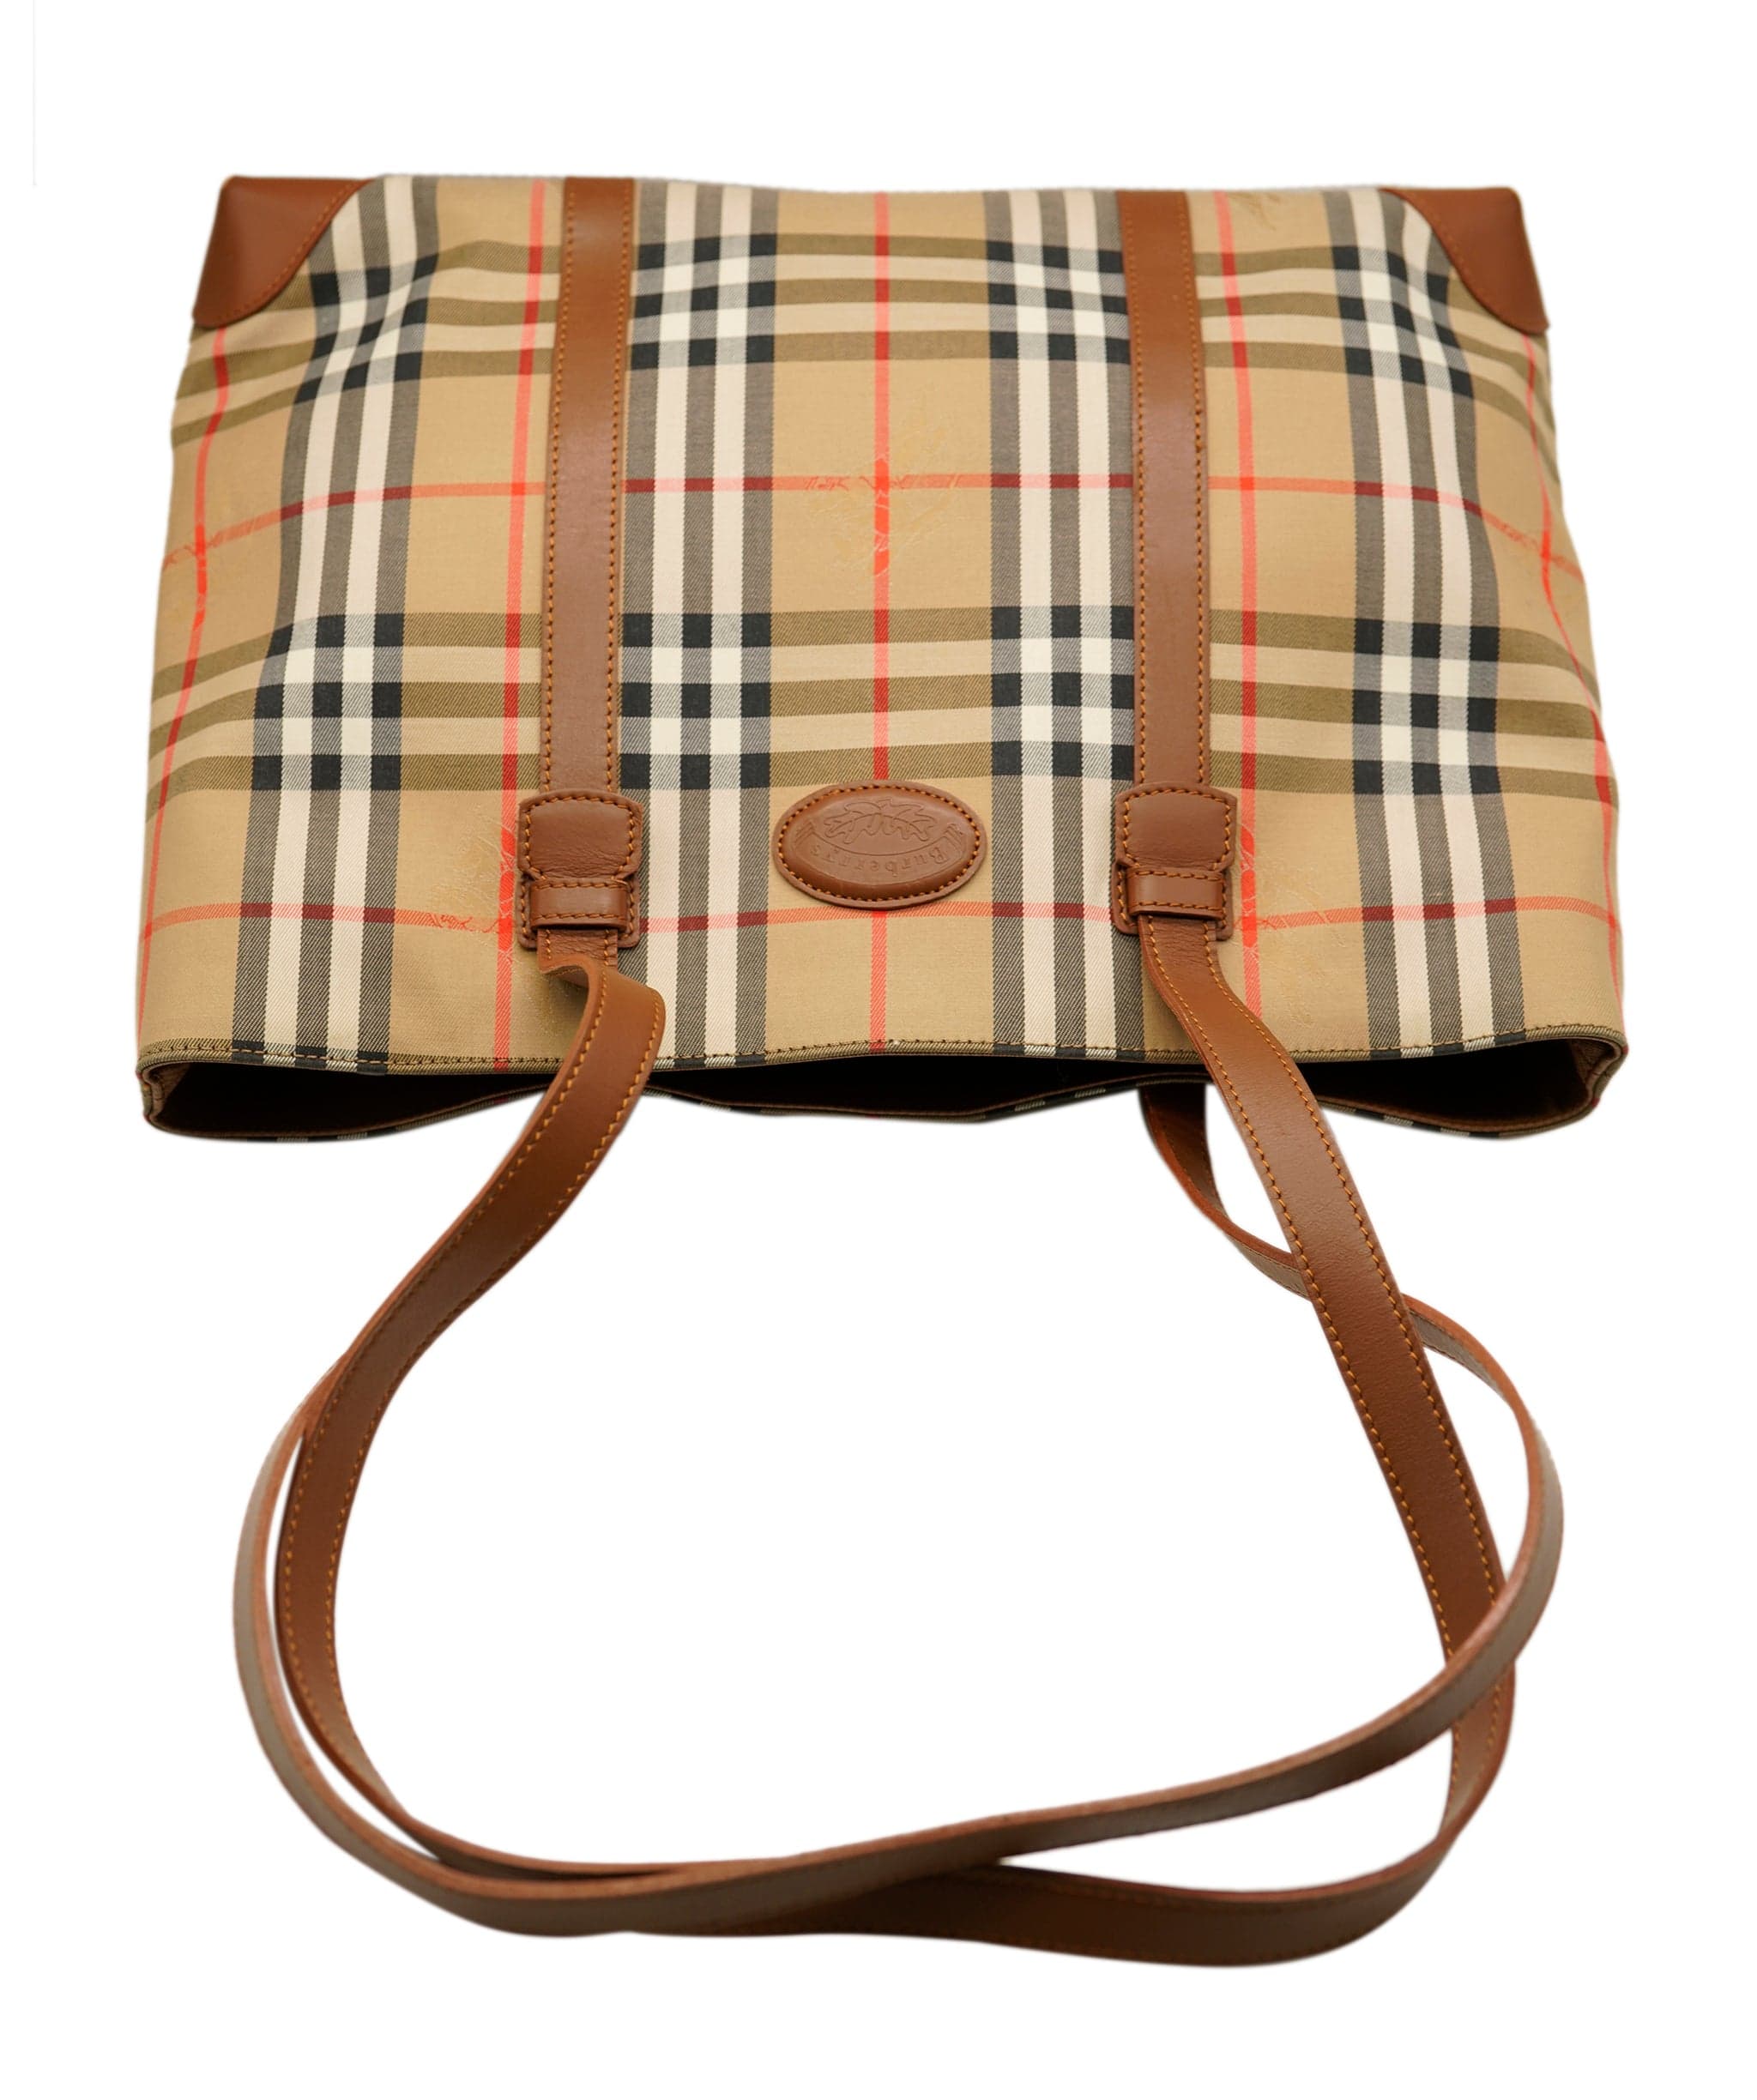 Burberry Burberrys Haymarket Check Canvas AAW4956 - AWC2173